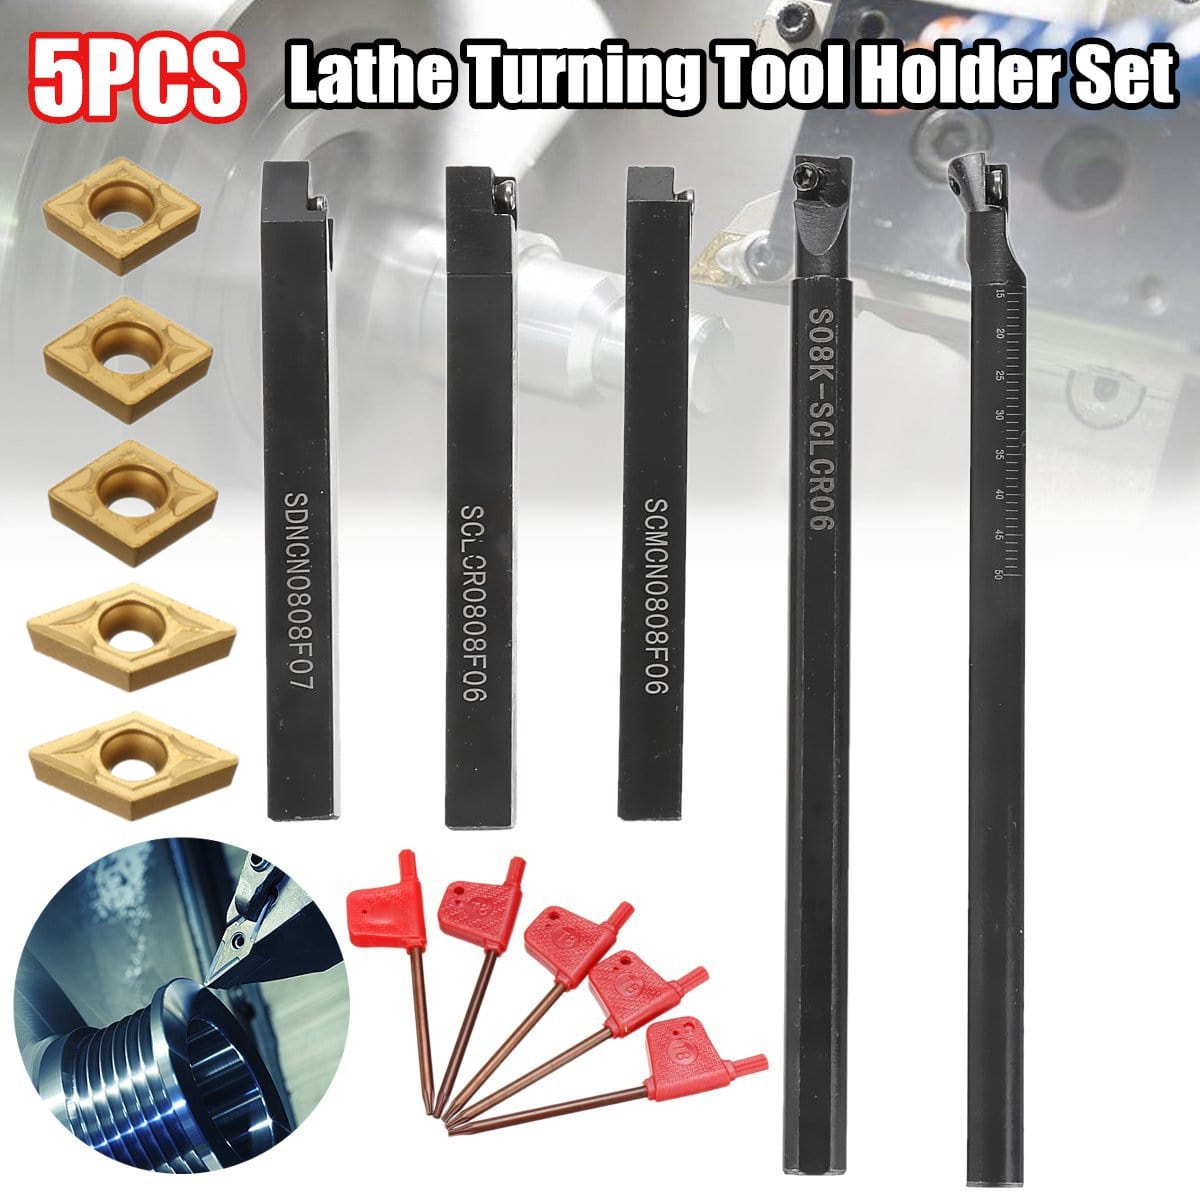 8 MM SHANK BORING AND THREADING TOOL SET WITH HOLDER FOR LATHE MACHINE 